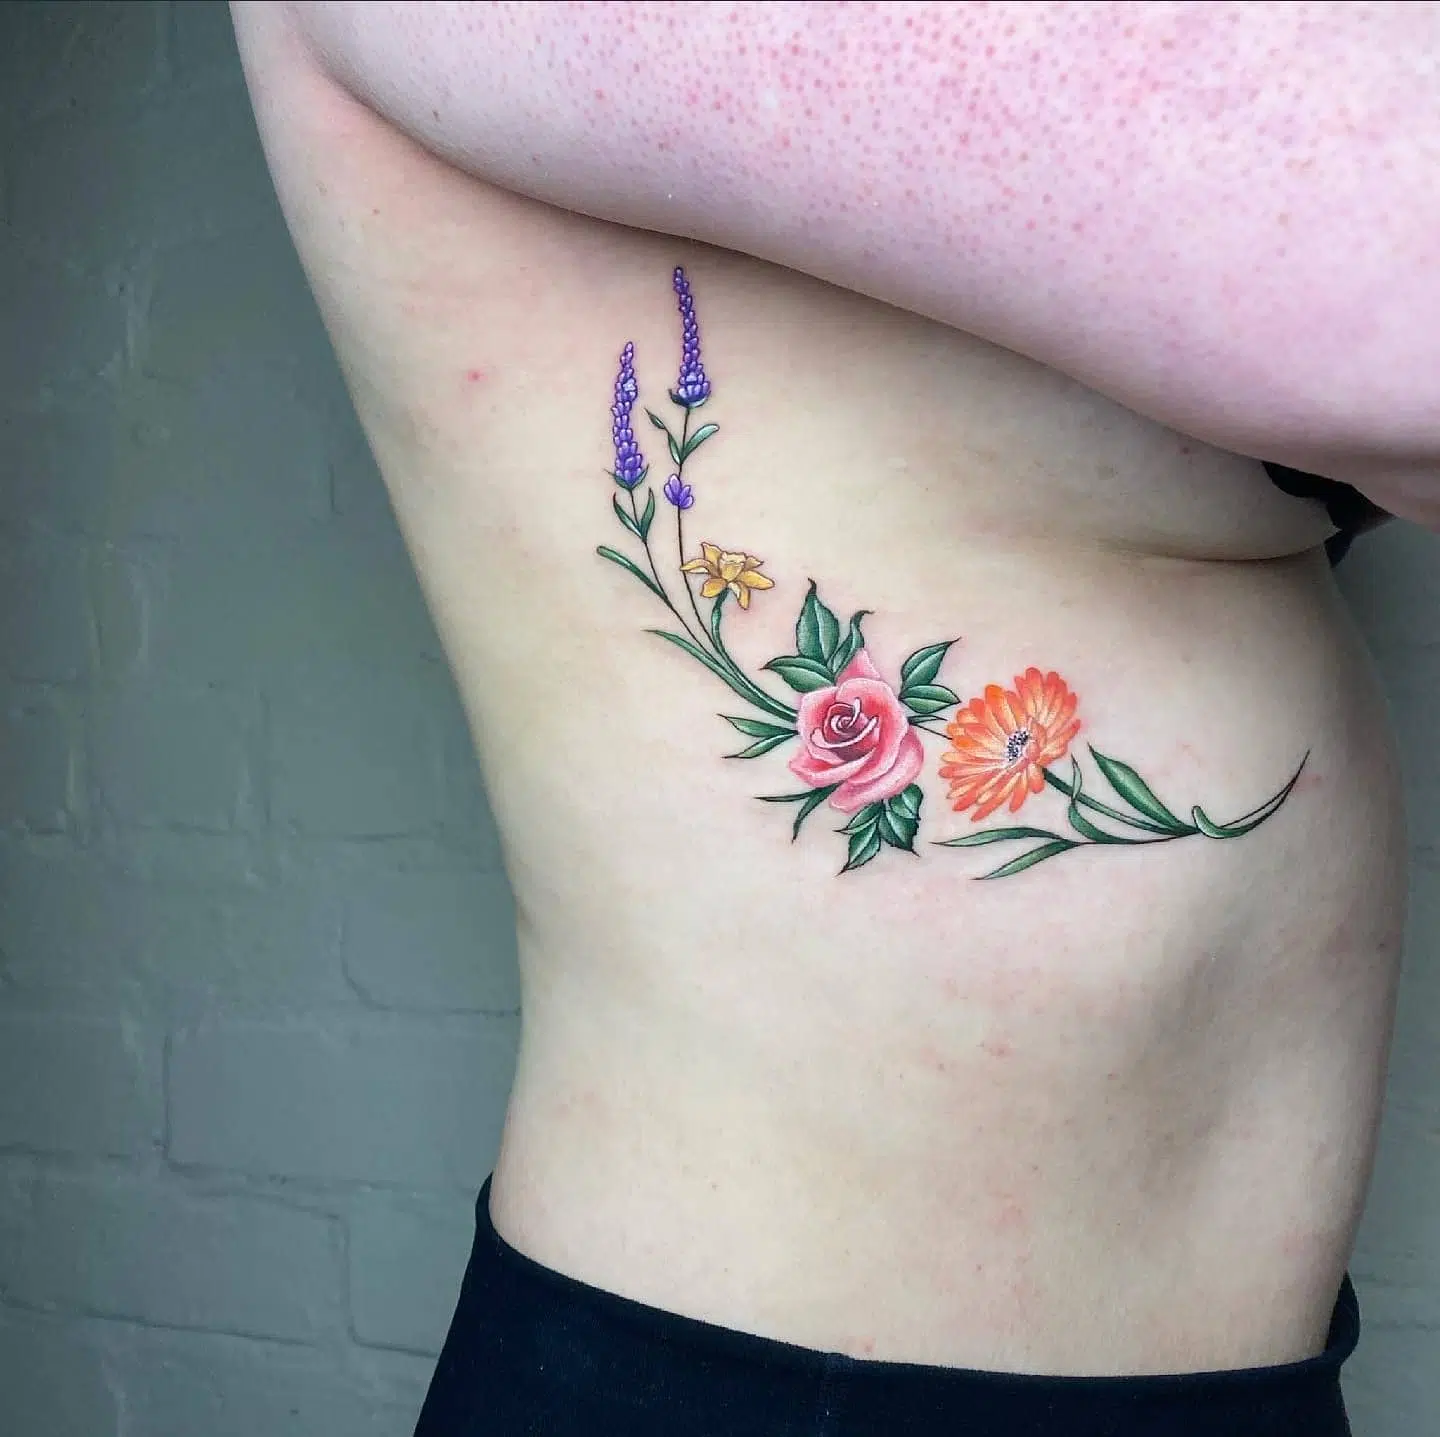 Beautiful arrangement of florals by Noemi. Thanks for sitting through this so well Danielle you tough cookie!

noemi_tattoo                     